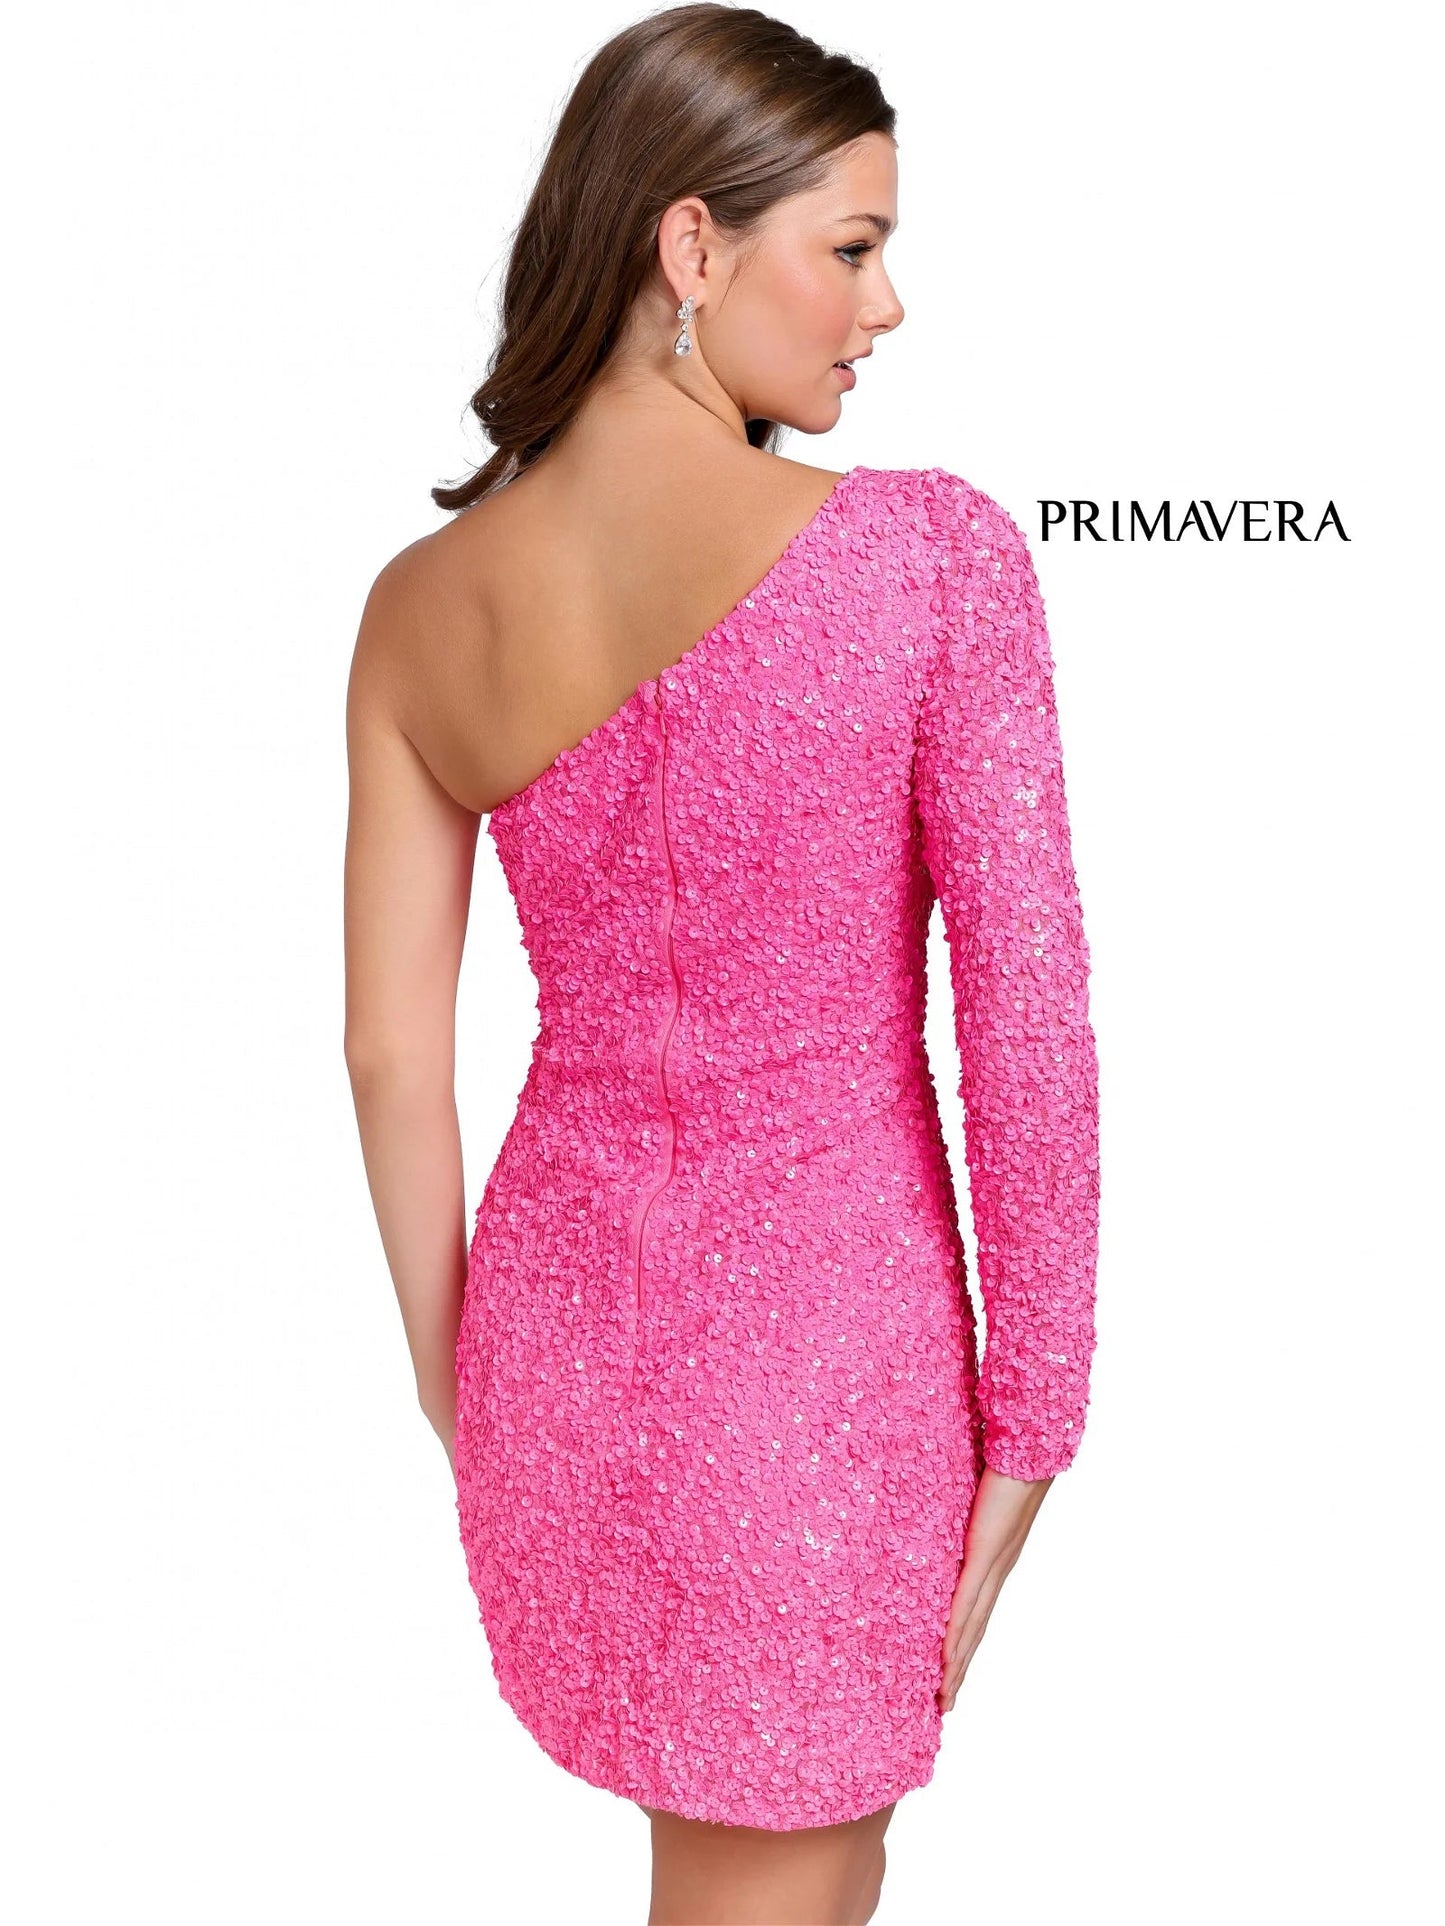 Primavera Couture 3860 Short 2023 Homecoming dress Fitted sequin beaded short cocktail dress One Shoulder Long Sleeve Maxi slit Homecoming  Available Color- Baby Pink, Gold, Lilac, Light Blue, Neon Pink, Red, Royal Blue, Apple Green, Mint, Peacock  Available Size-00-18